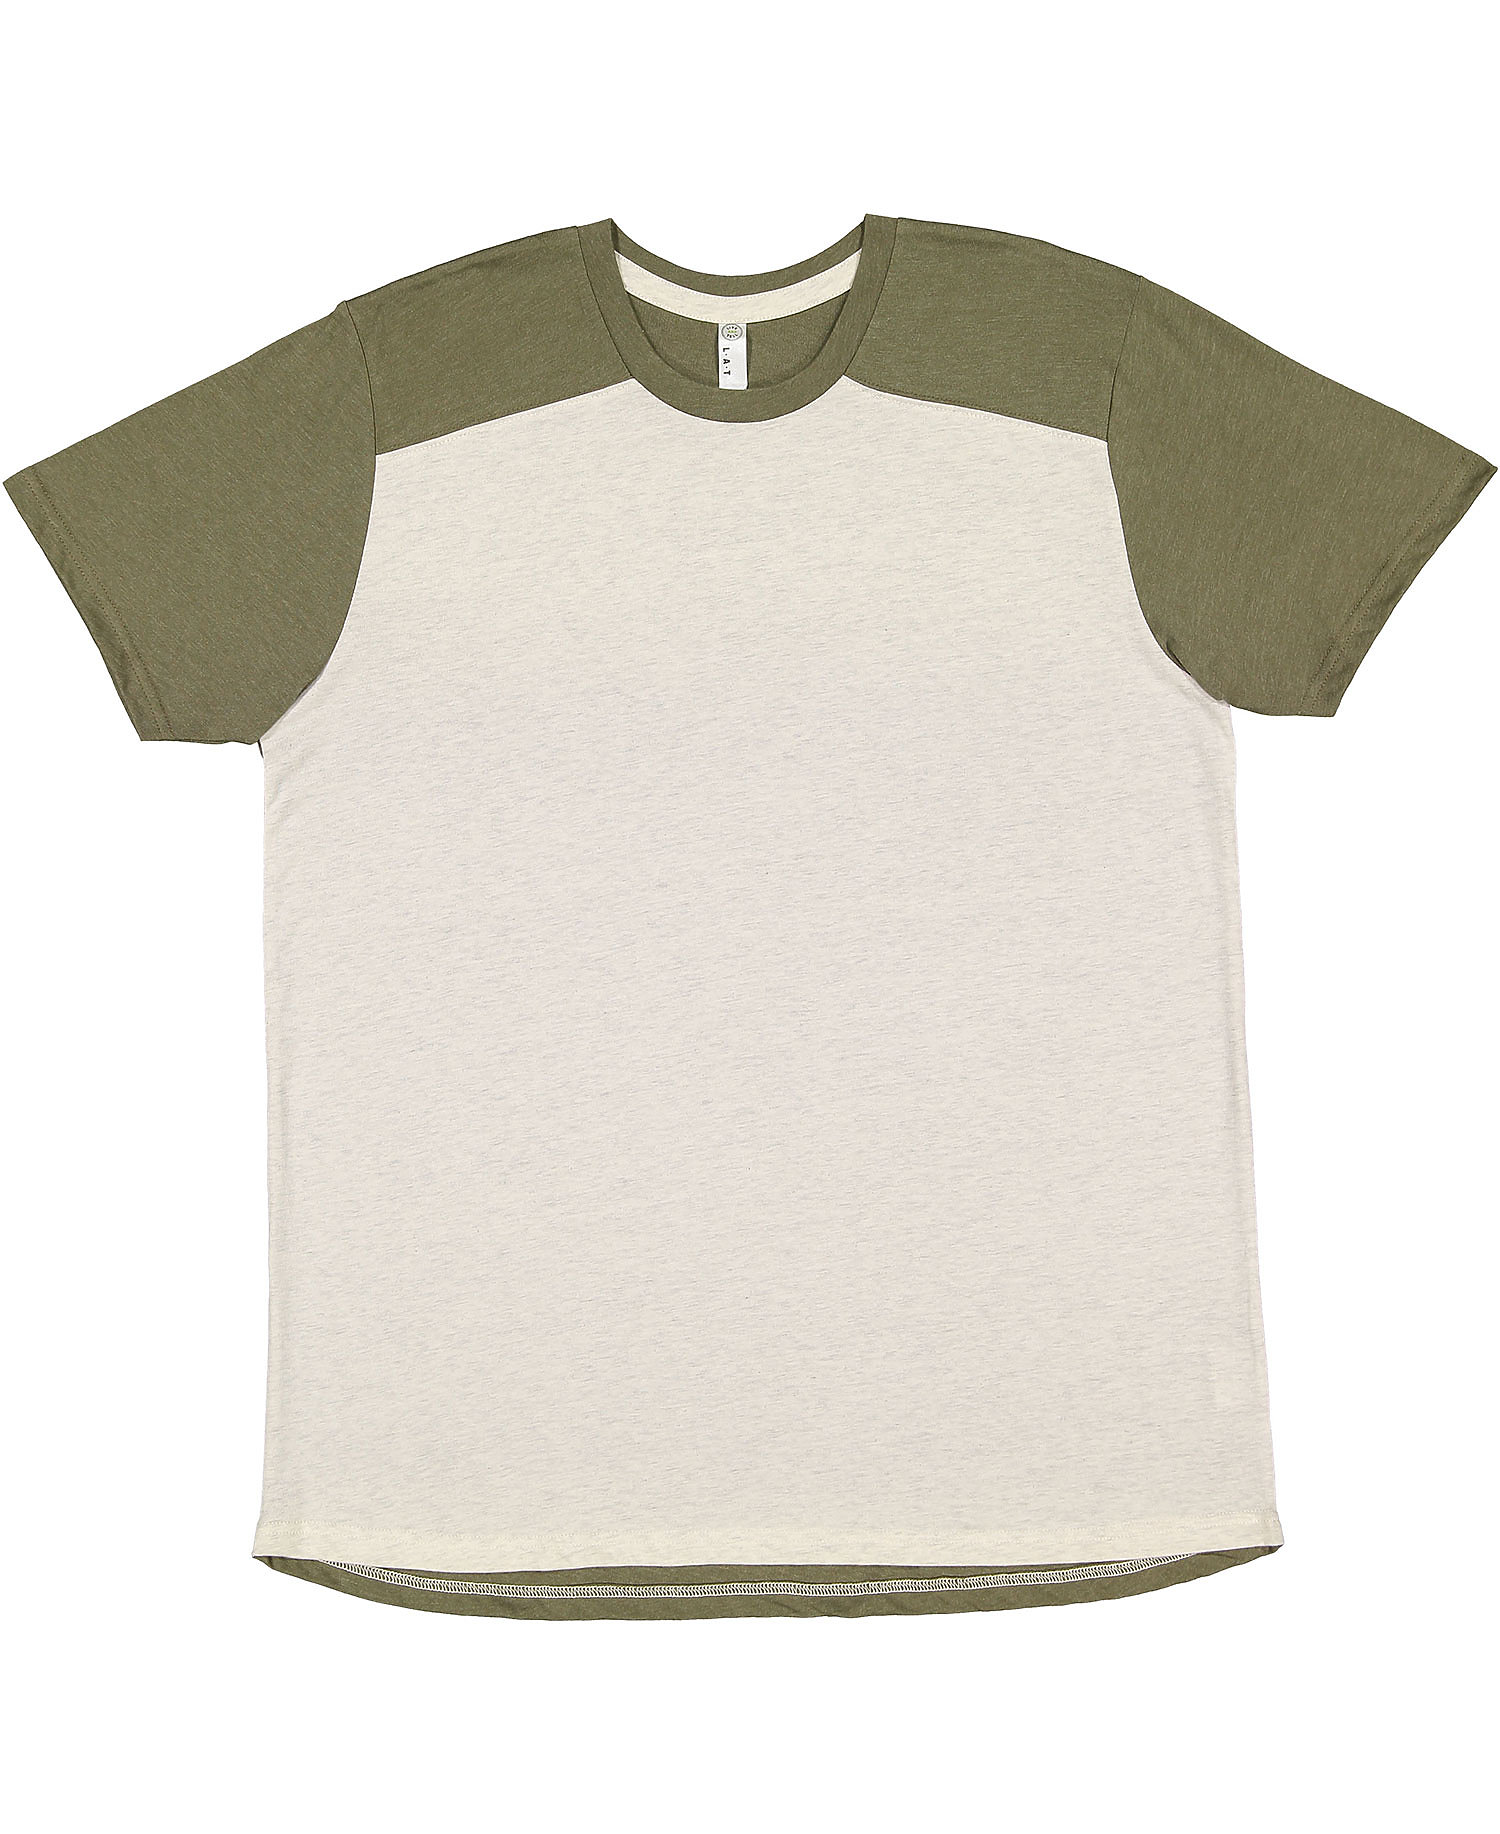 click to view Natural Heather/ Military Grn